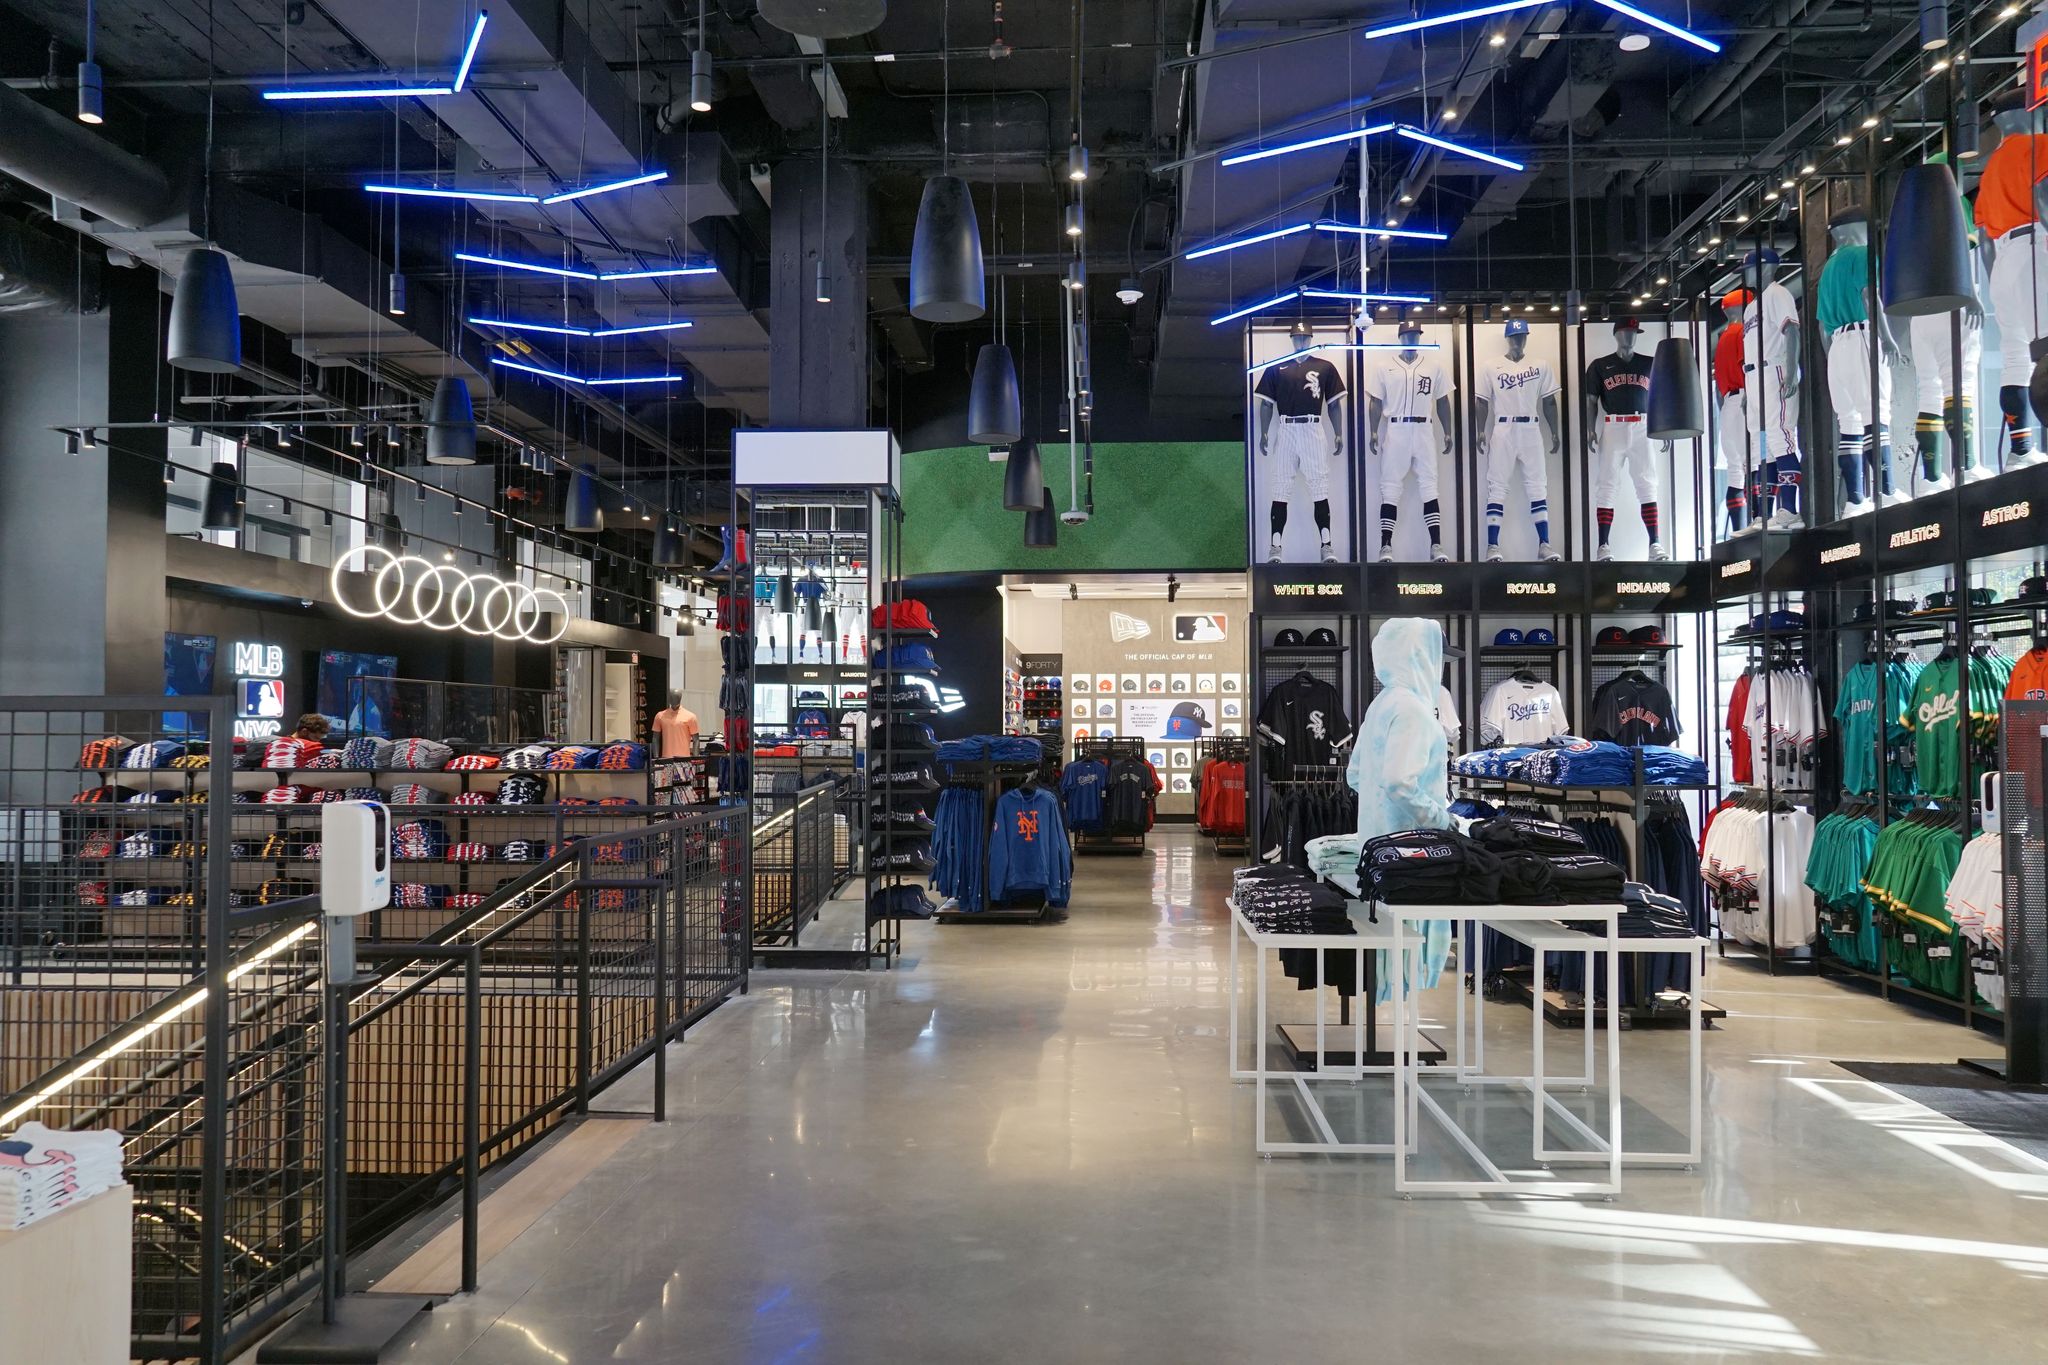 The MLB's new flagship store in NYC looks like baseball Valhalla